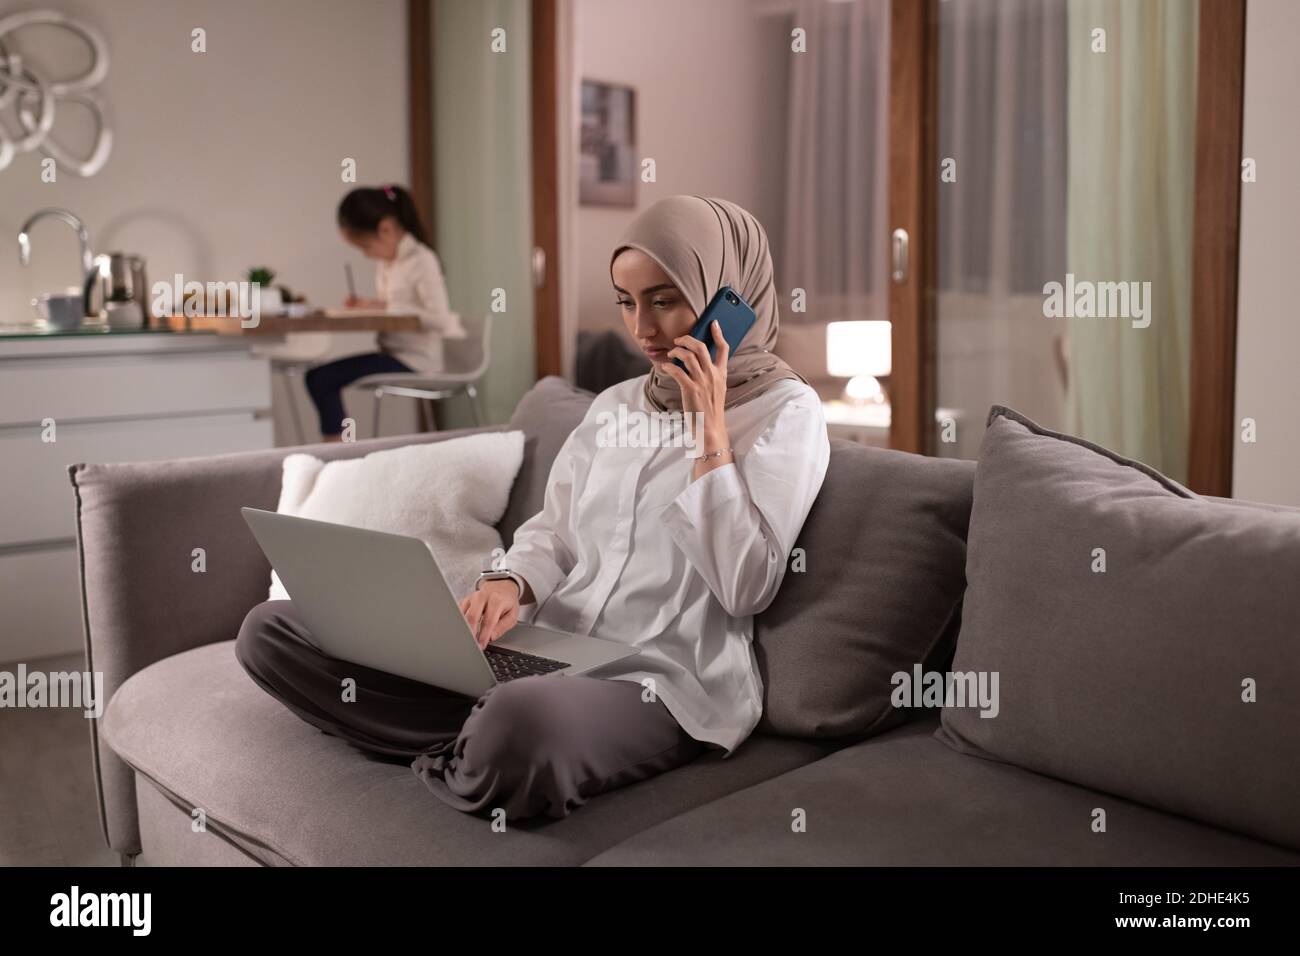 Muslim woman using laptop and speaking on phone near drawing daughter at home Stock Photo